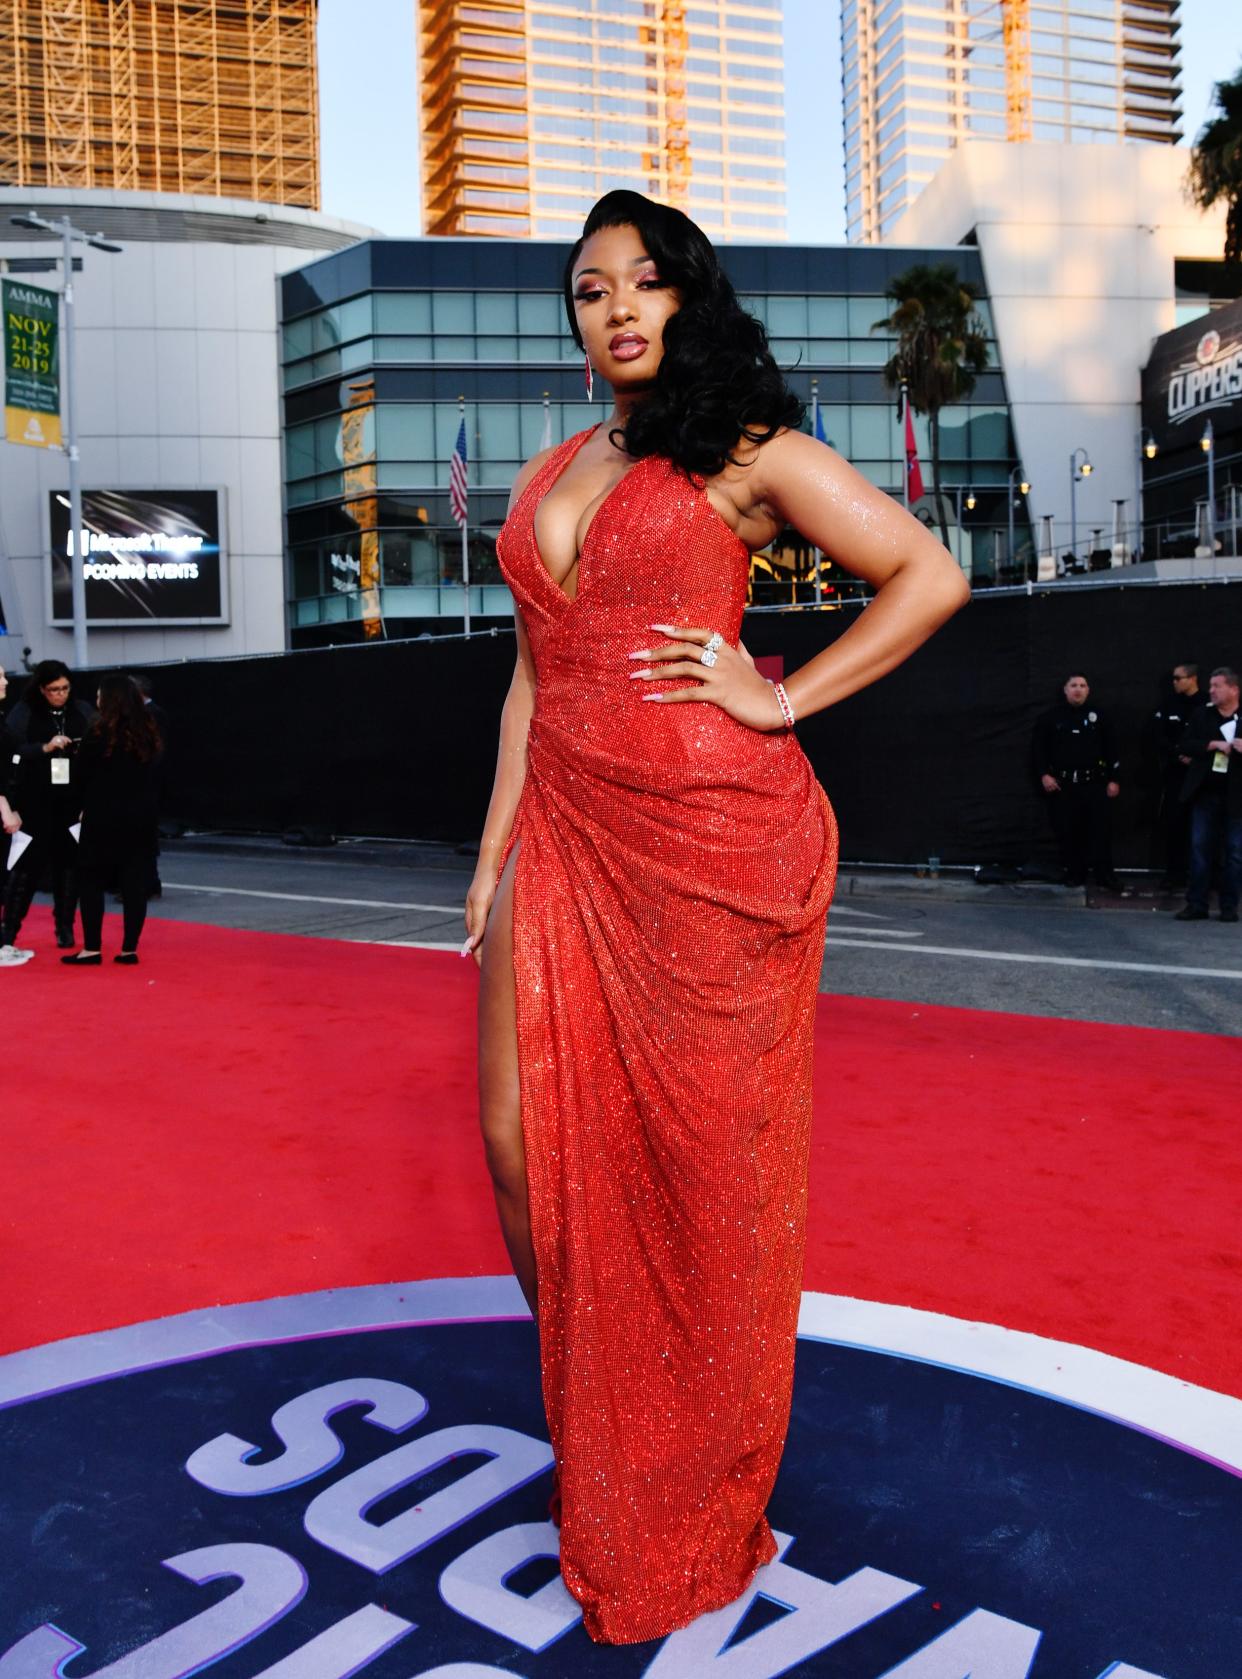 Megan Thee Stallion attends the 2019 American Music Awards at Microsoft Theater on Nov. 24, 2019, in Los Angeles, Calif.